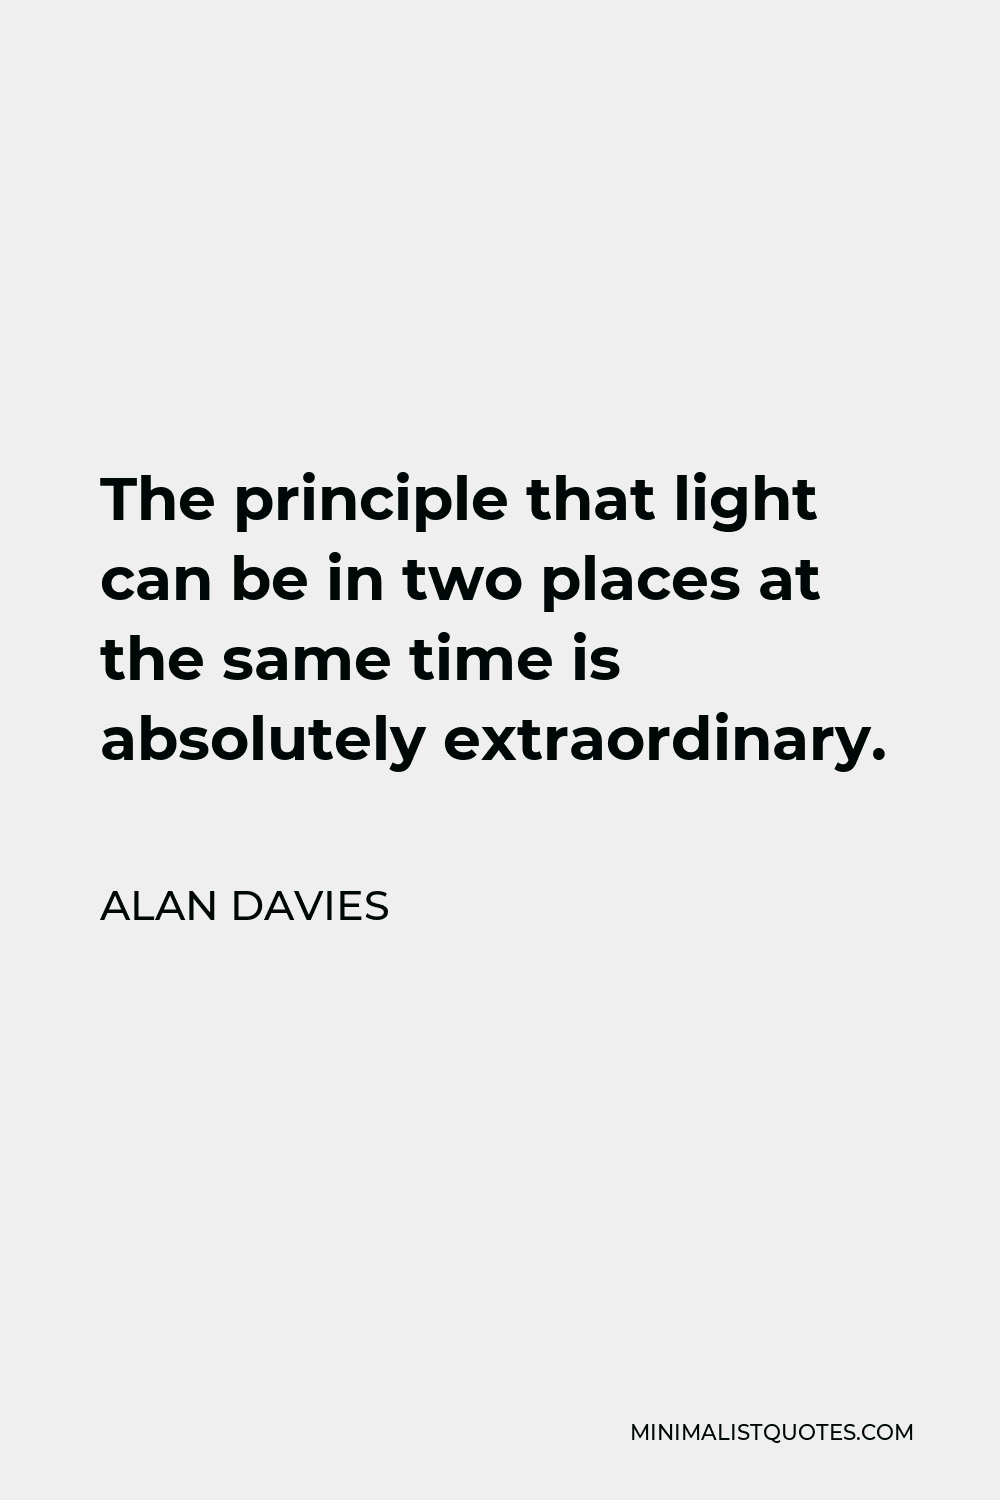 Alan Davies Quote - The principle that light can be in two places at the same time is absolutely extraordinary.